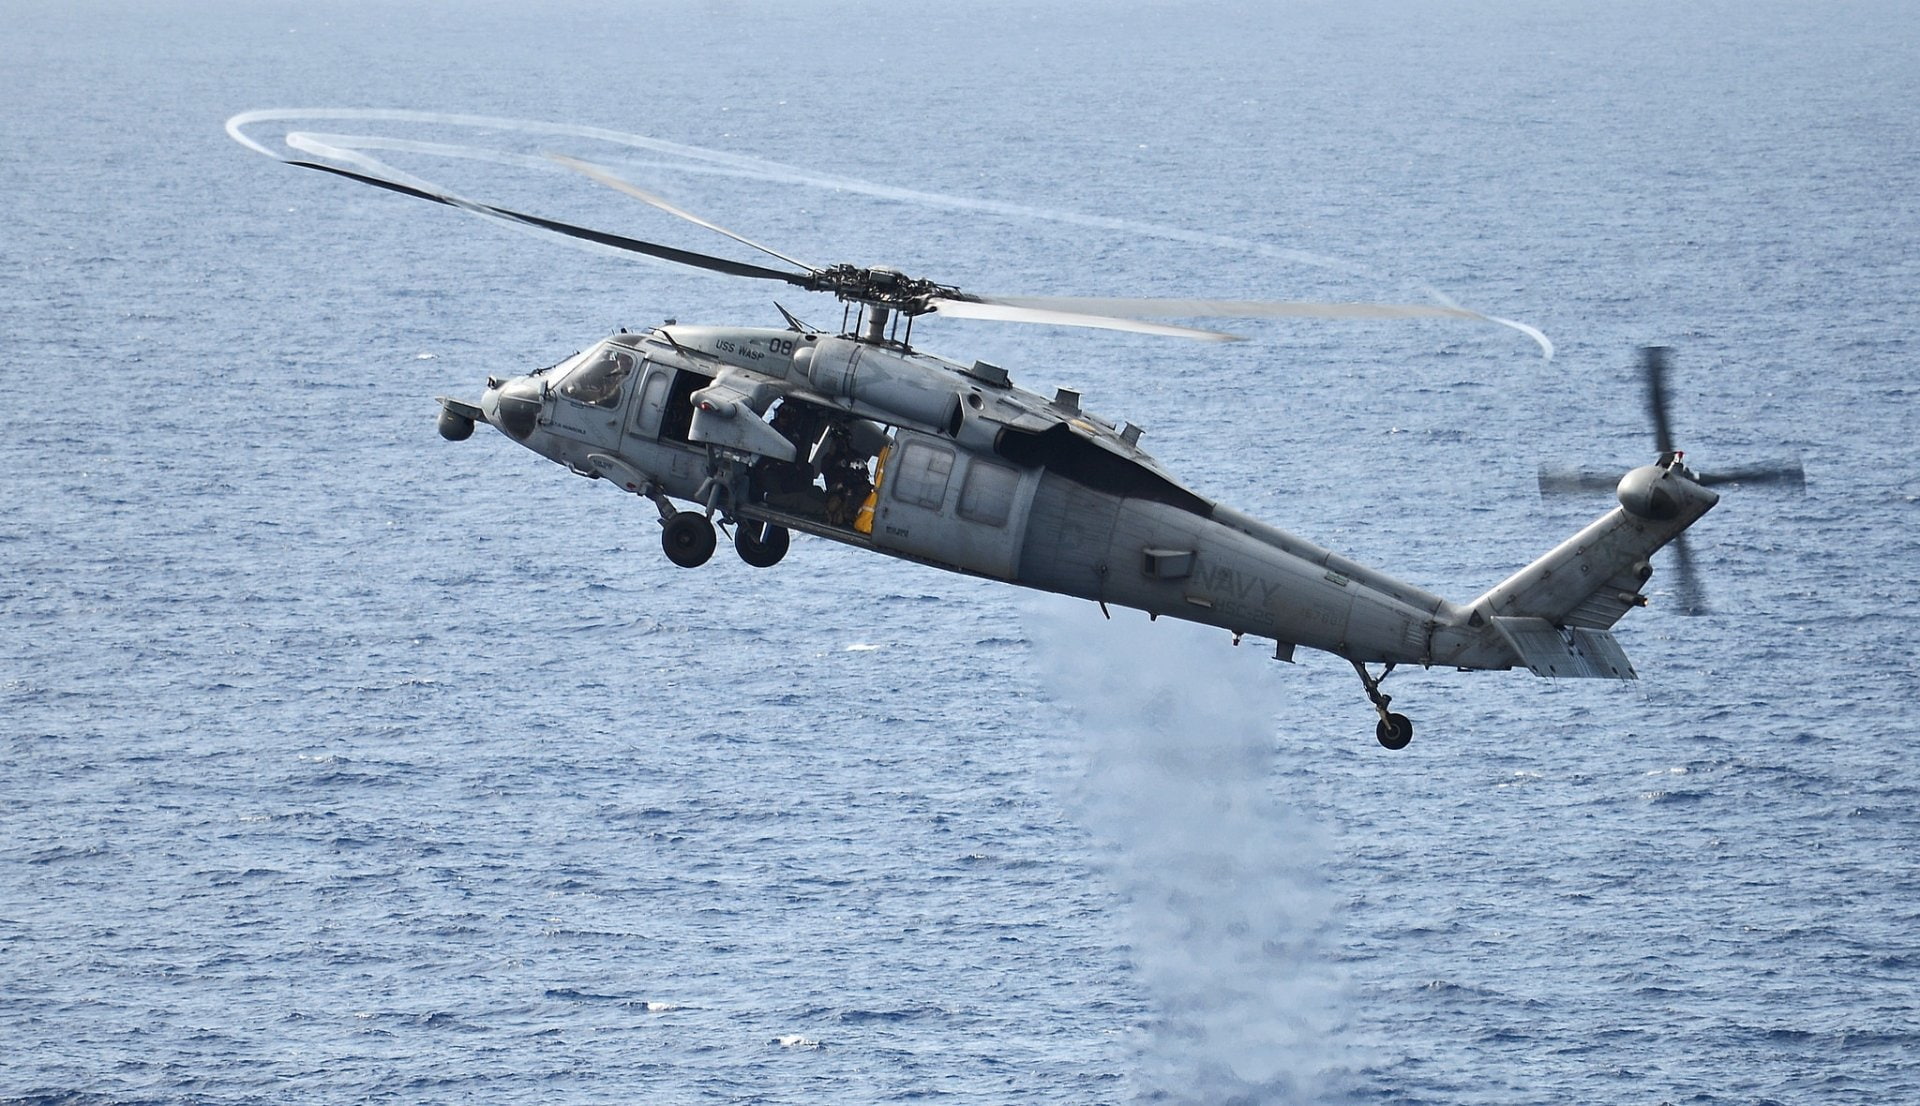 Military Helicopters, Sikorsky SH-60 Seahawk, Aircraft